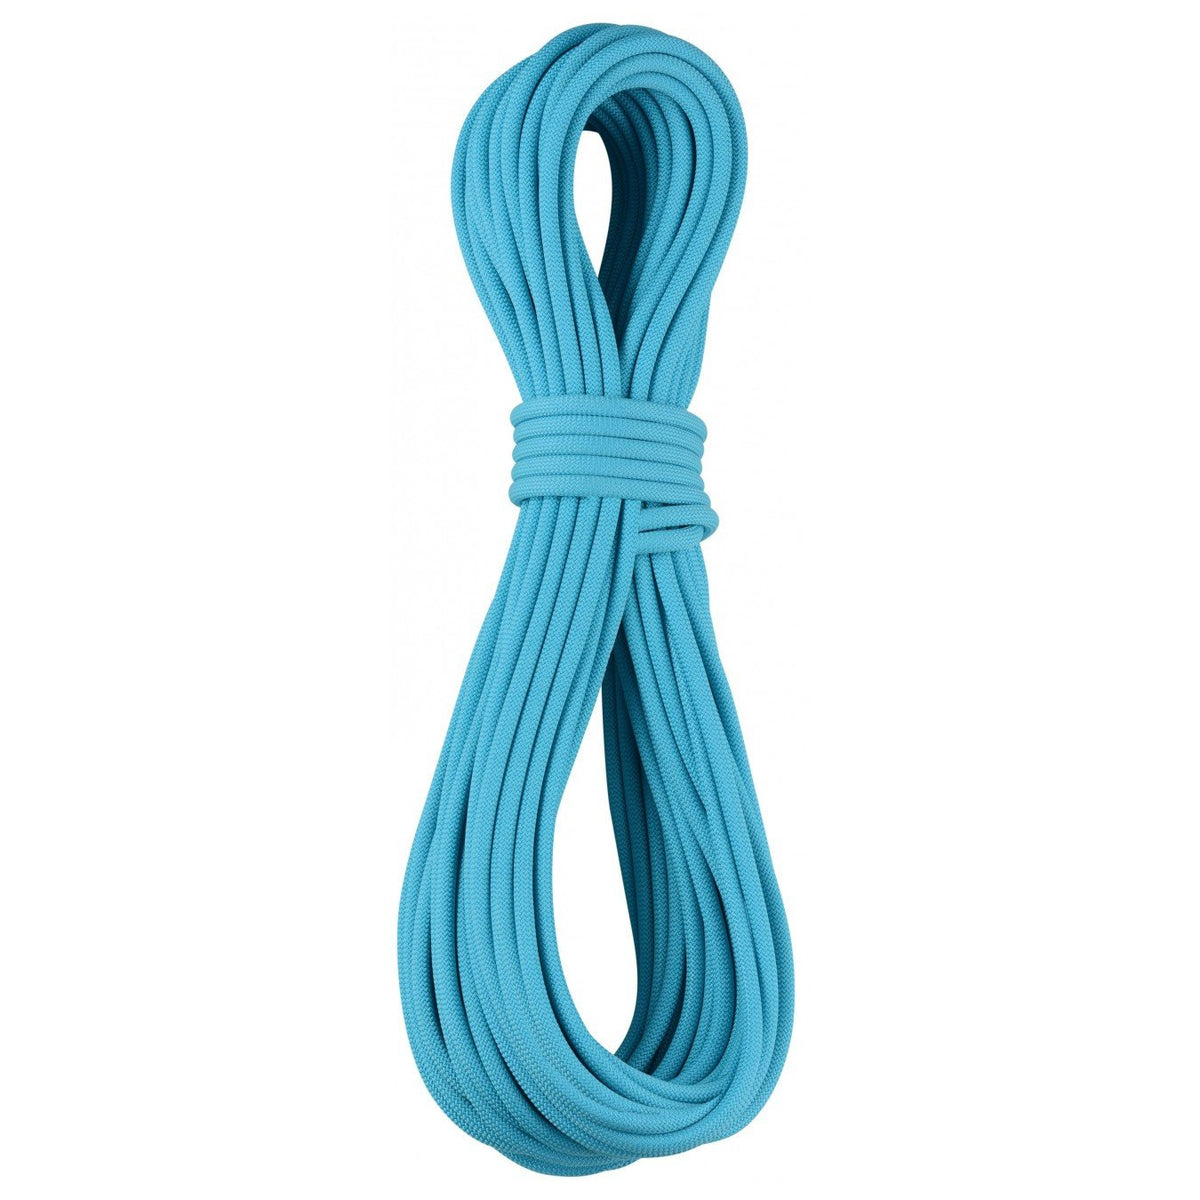 Edelrid Apus Pro Dry 7.9mm x 60m climbing rope, in icemint colour